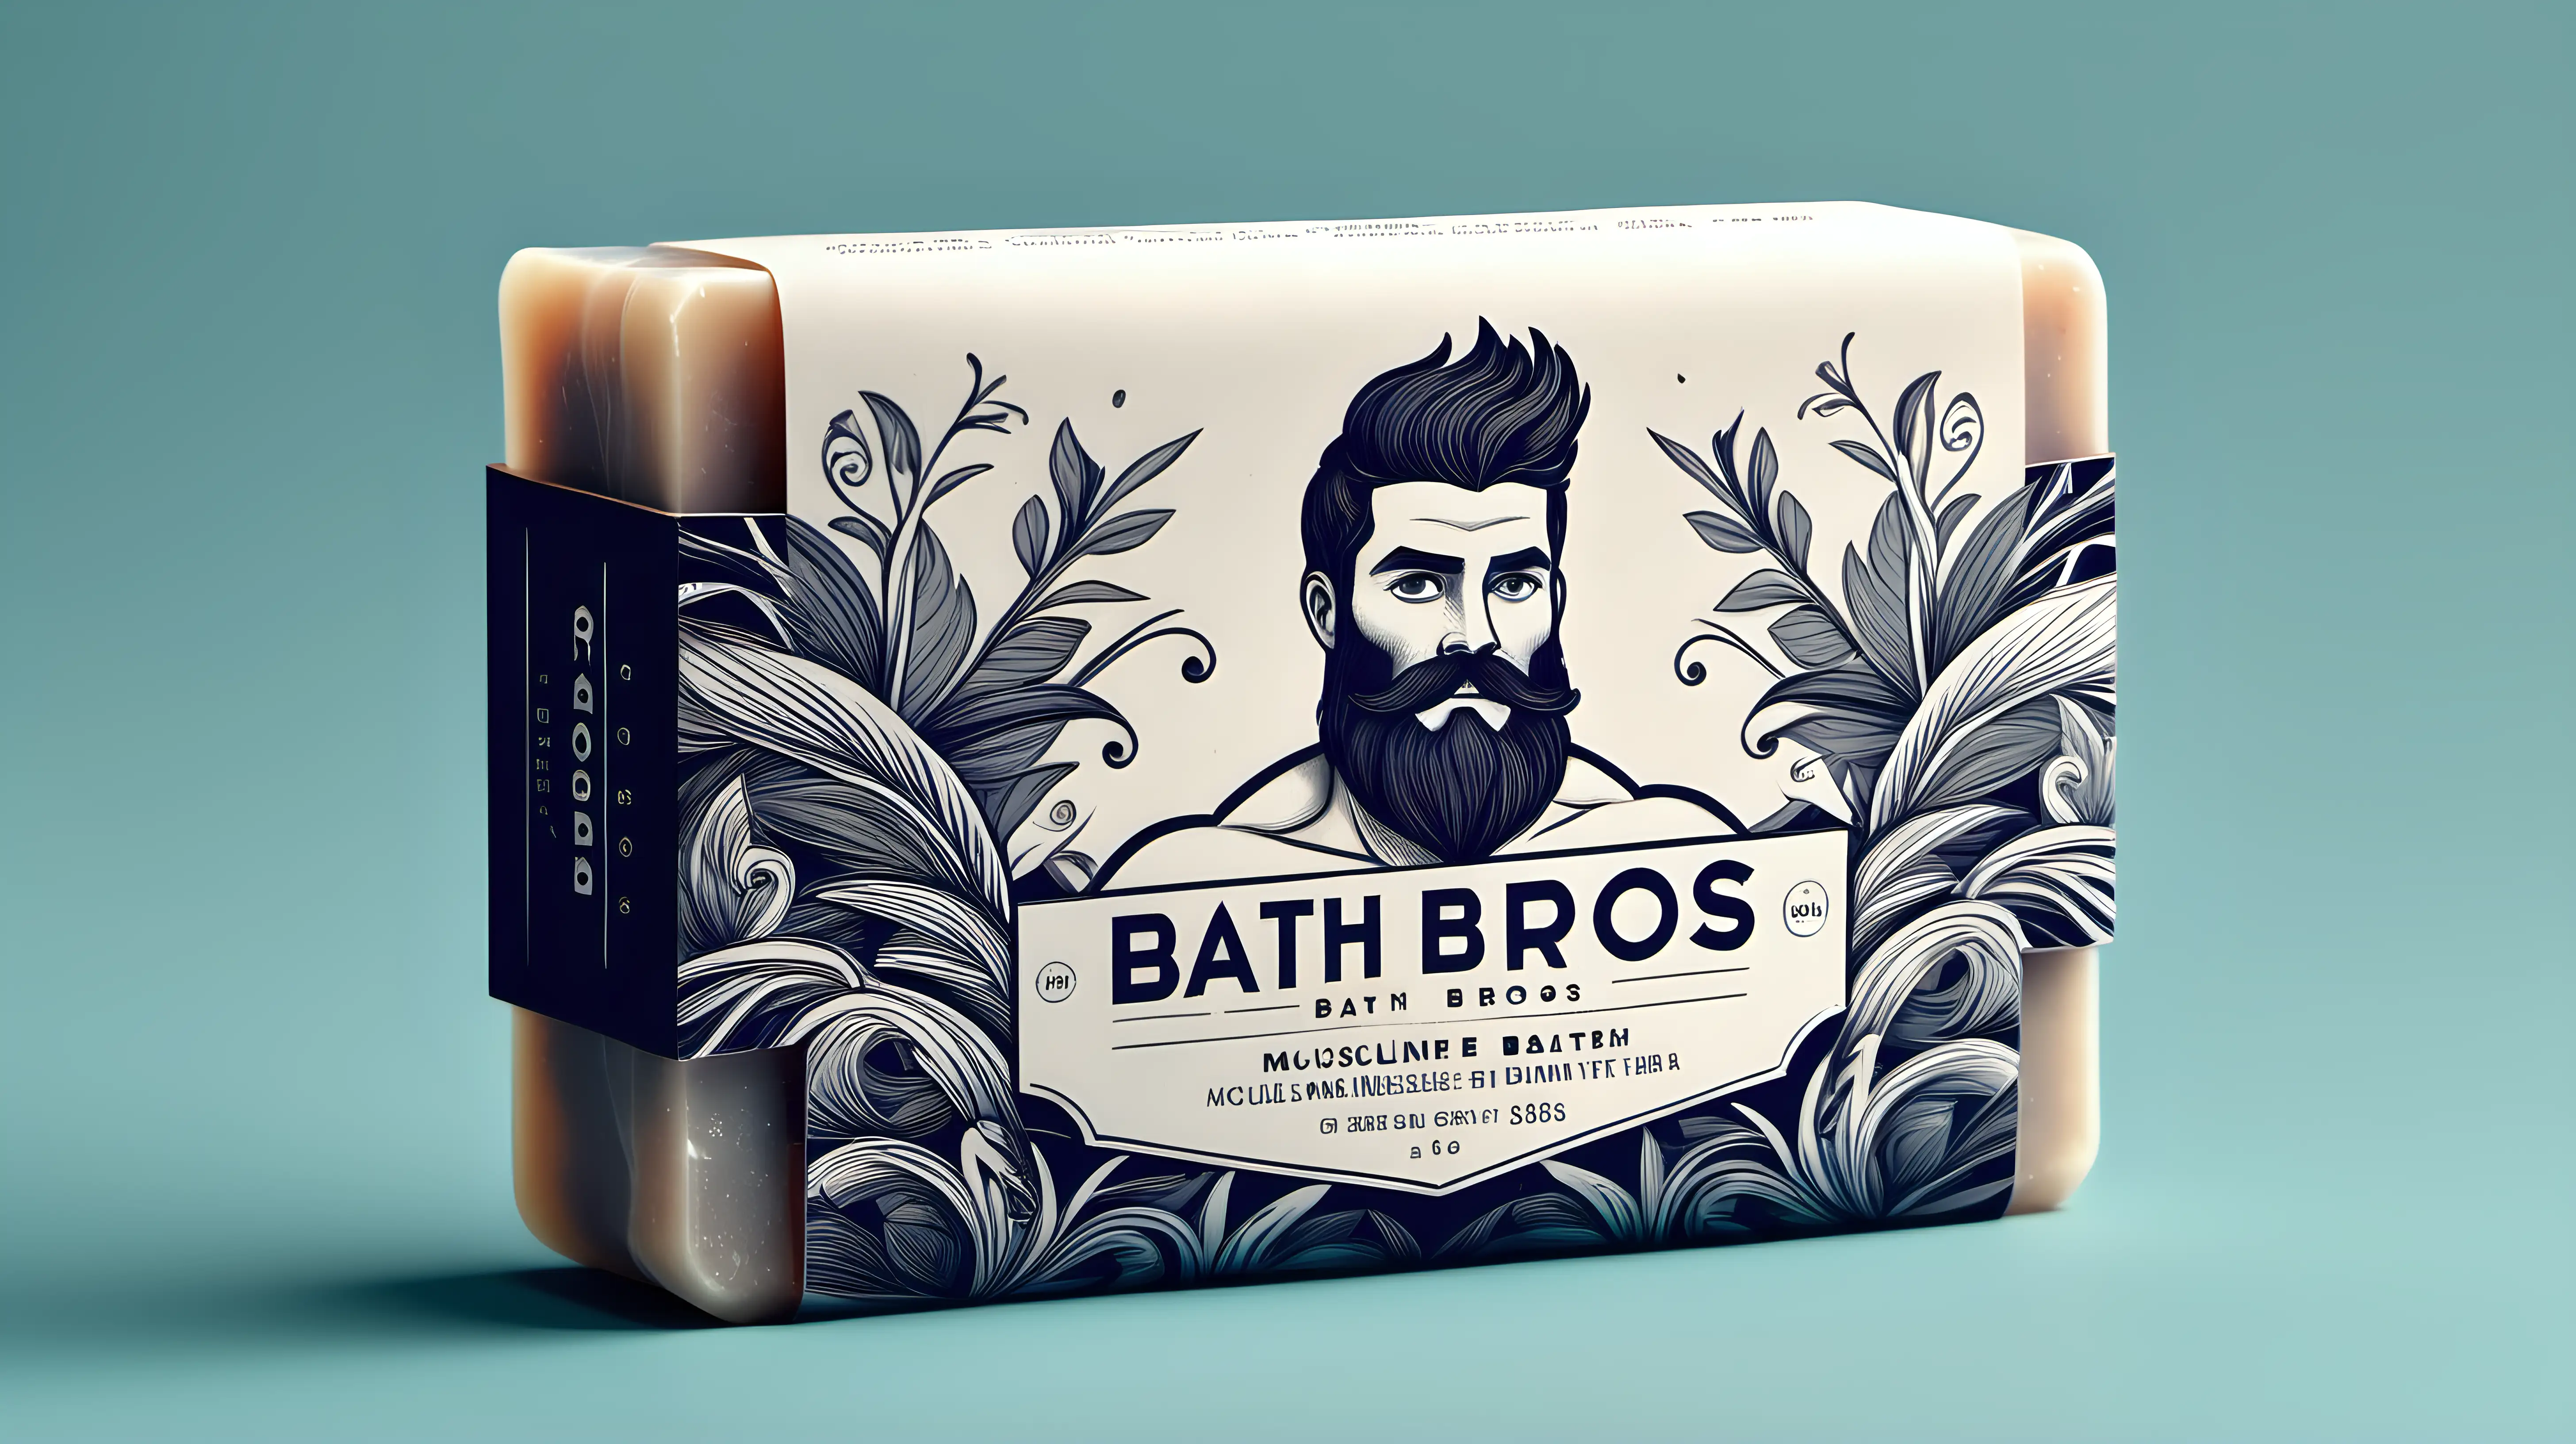 A modern packing design for a Soap bar for a masculine mens care brand called Bath Bros. It should feature a masculine design with a muscular bearded guy in a bath